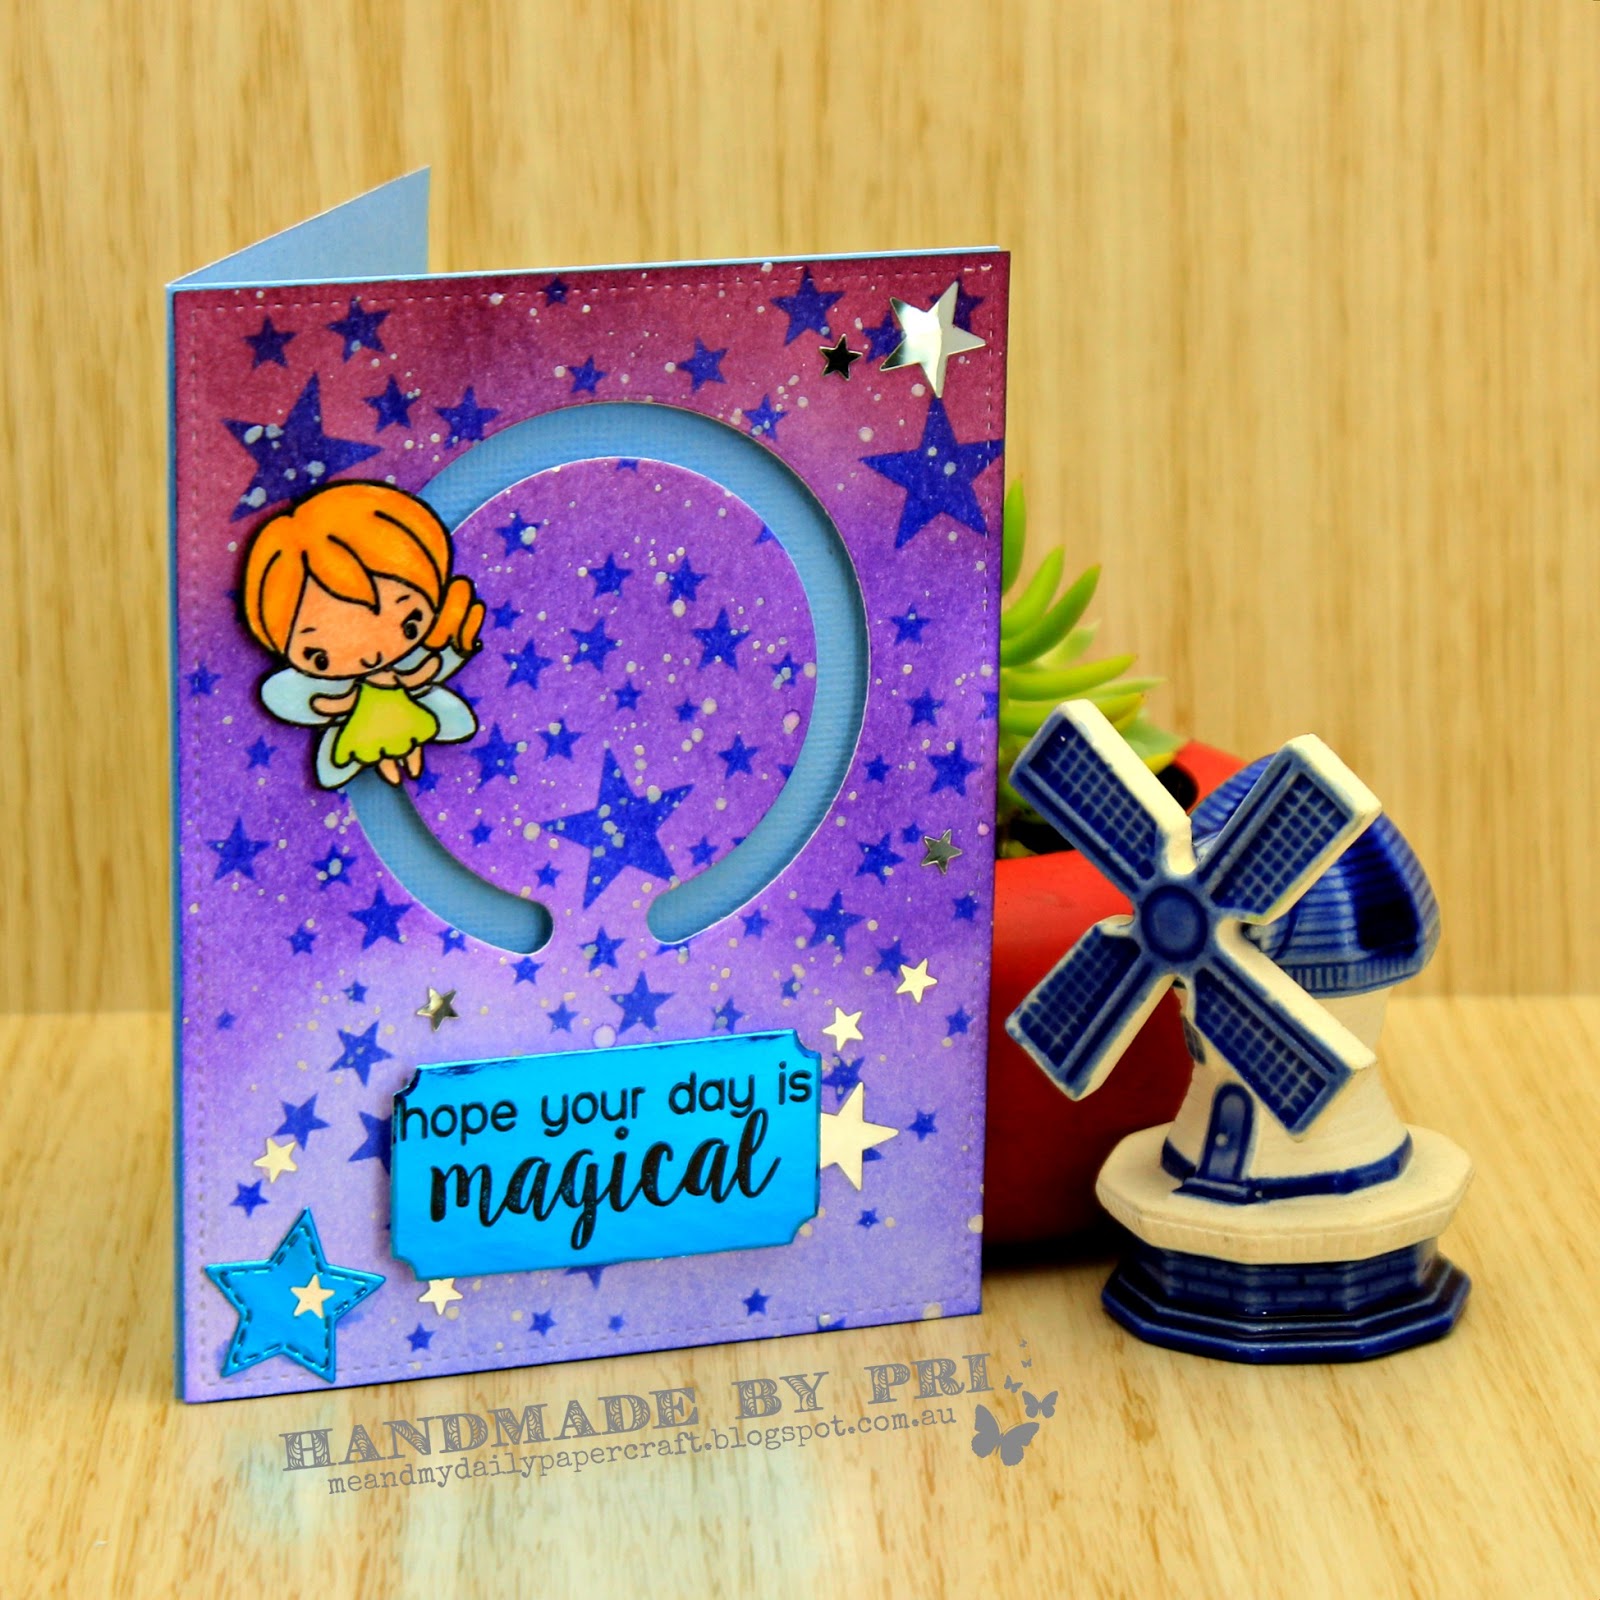 Me And My Daily Papercraft: A Fairy Spinner Card